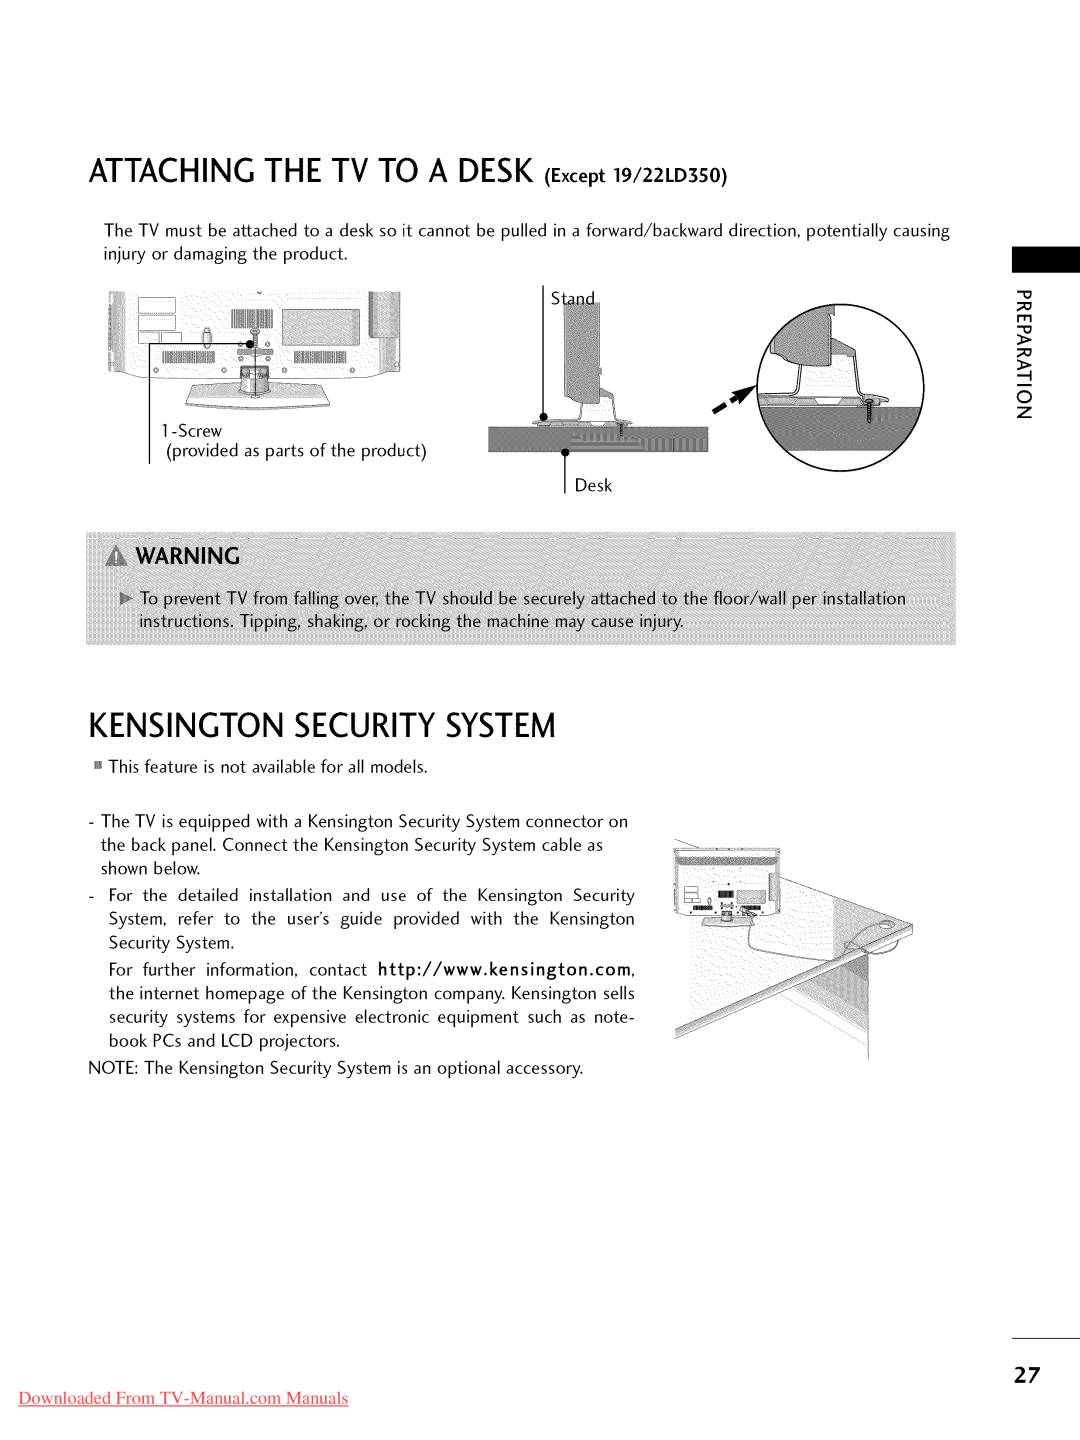 LG Electronics 19LD350, 32LD350, 47LD450, 47LD520 Kensingtonsecuritysystem, ATTACHING THE TV TO A DESK Except 19/22LD3S0 